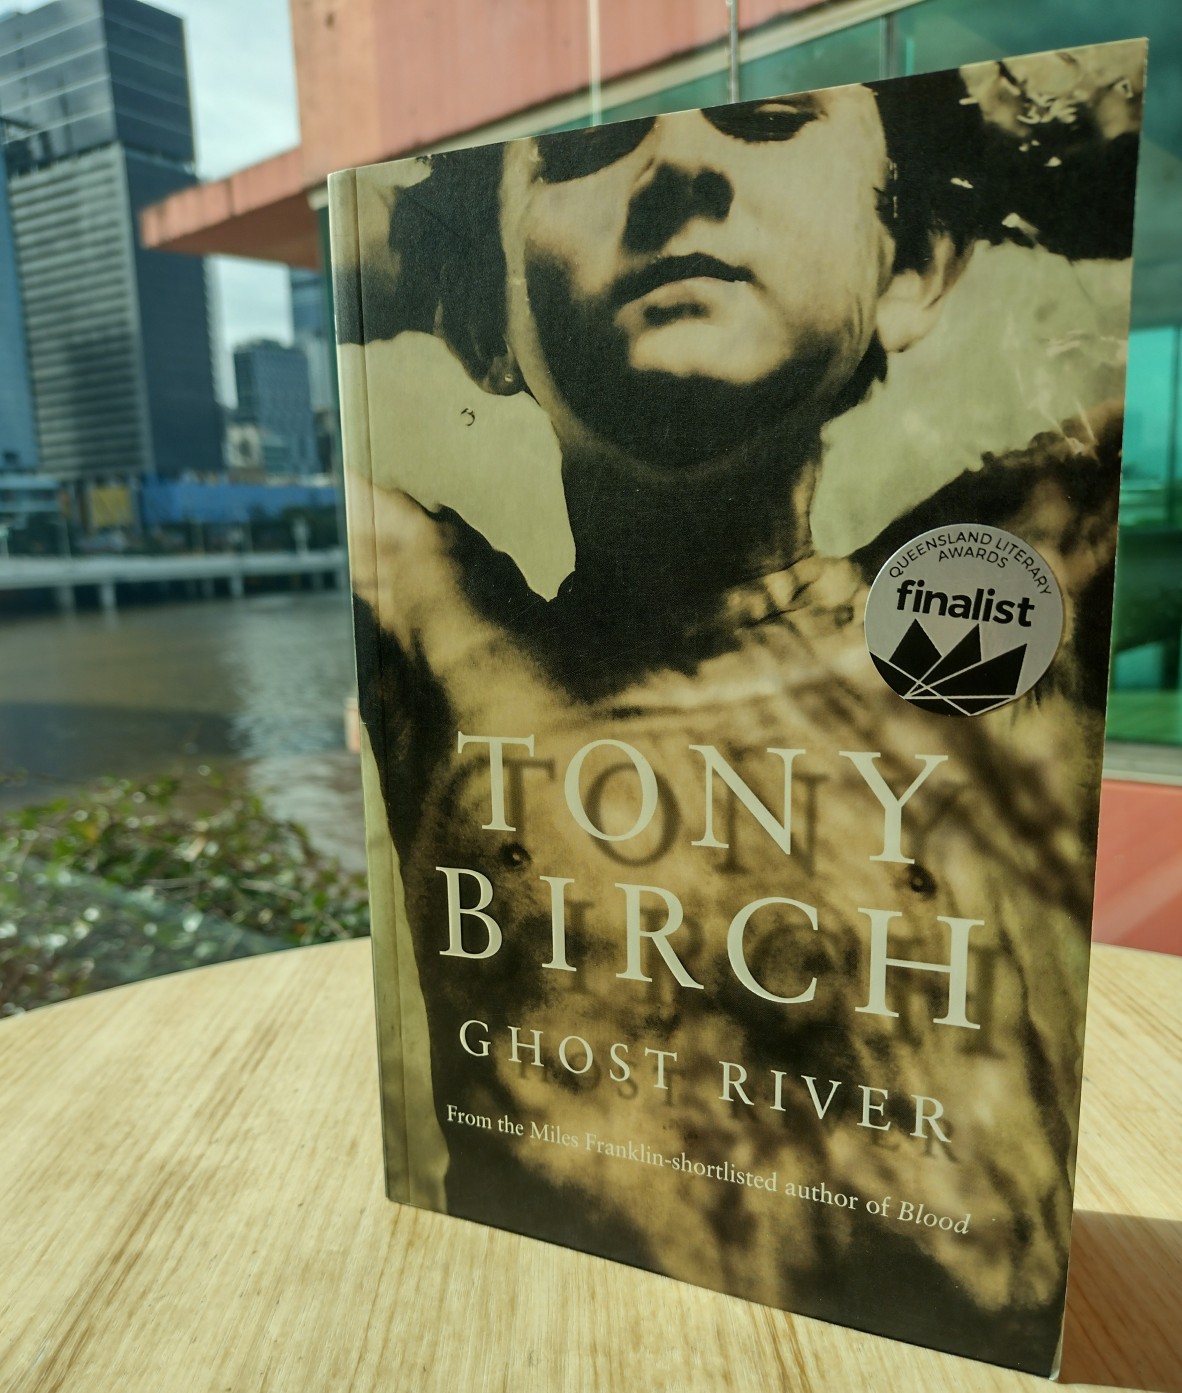 A book sitting on a table in a light-filled space with a cityscape and glimpse of a river in the background. The text on the cover reads Tony Birch Ghost River. From the Miles Franklin-shortlisted author of Blood.